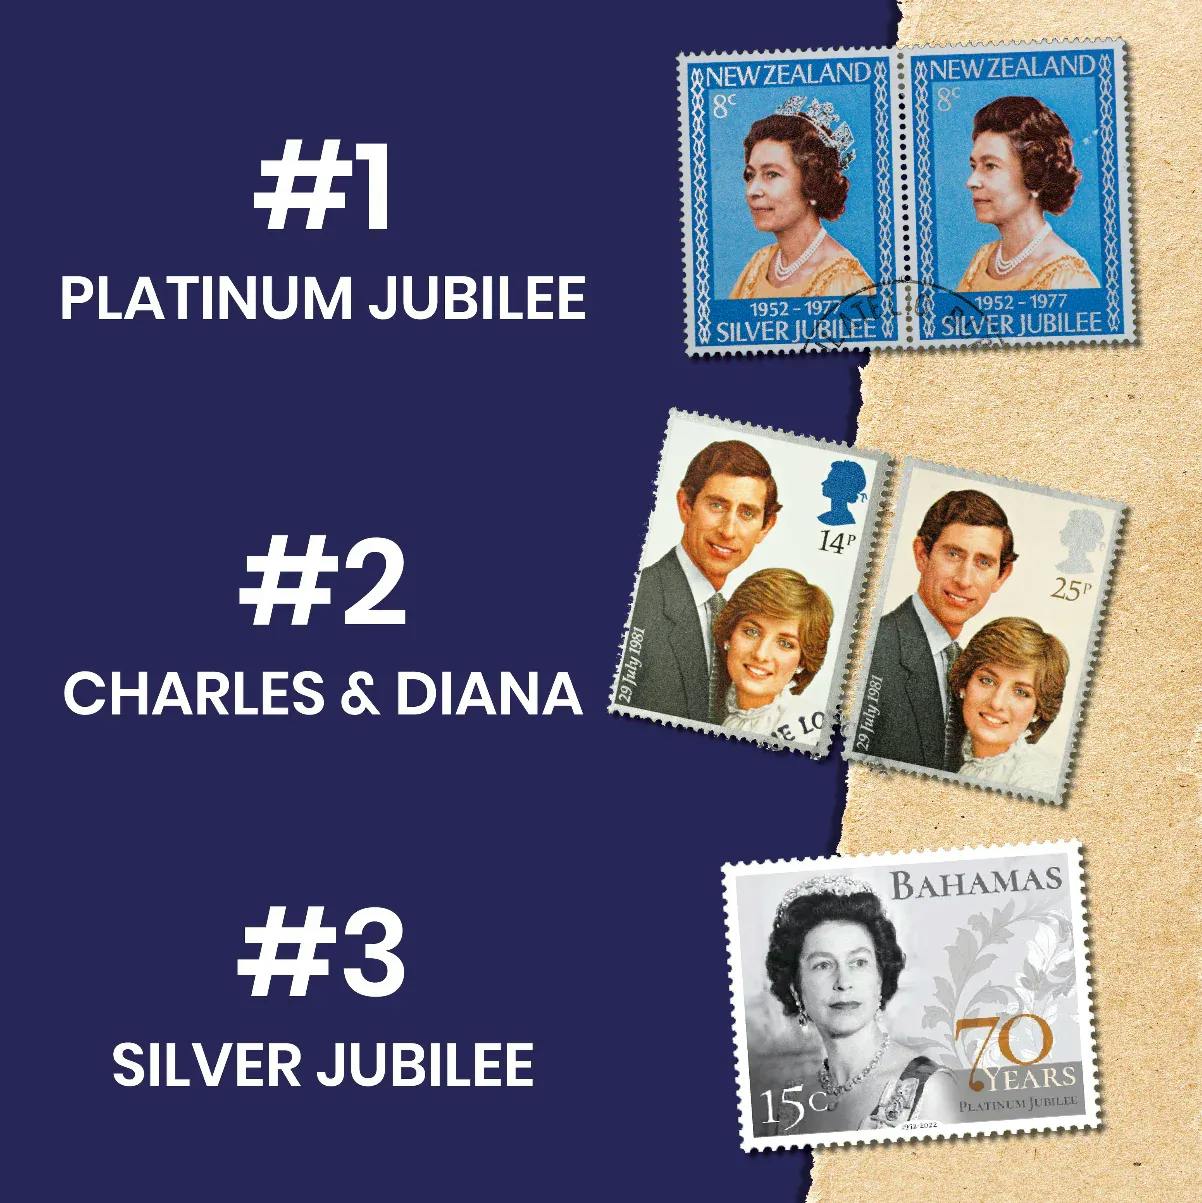 The upcoming Platinum Jubilee (2022) takes first place, followed by Charles and Diana’s wedding (1981) in second, followed by the Silver Jubilee (1977) in third.